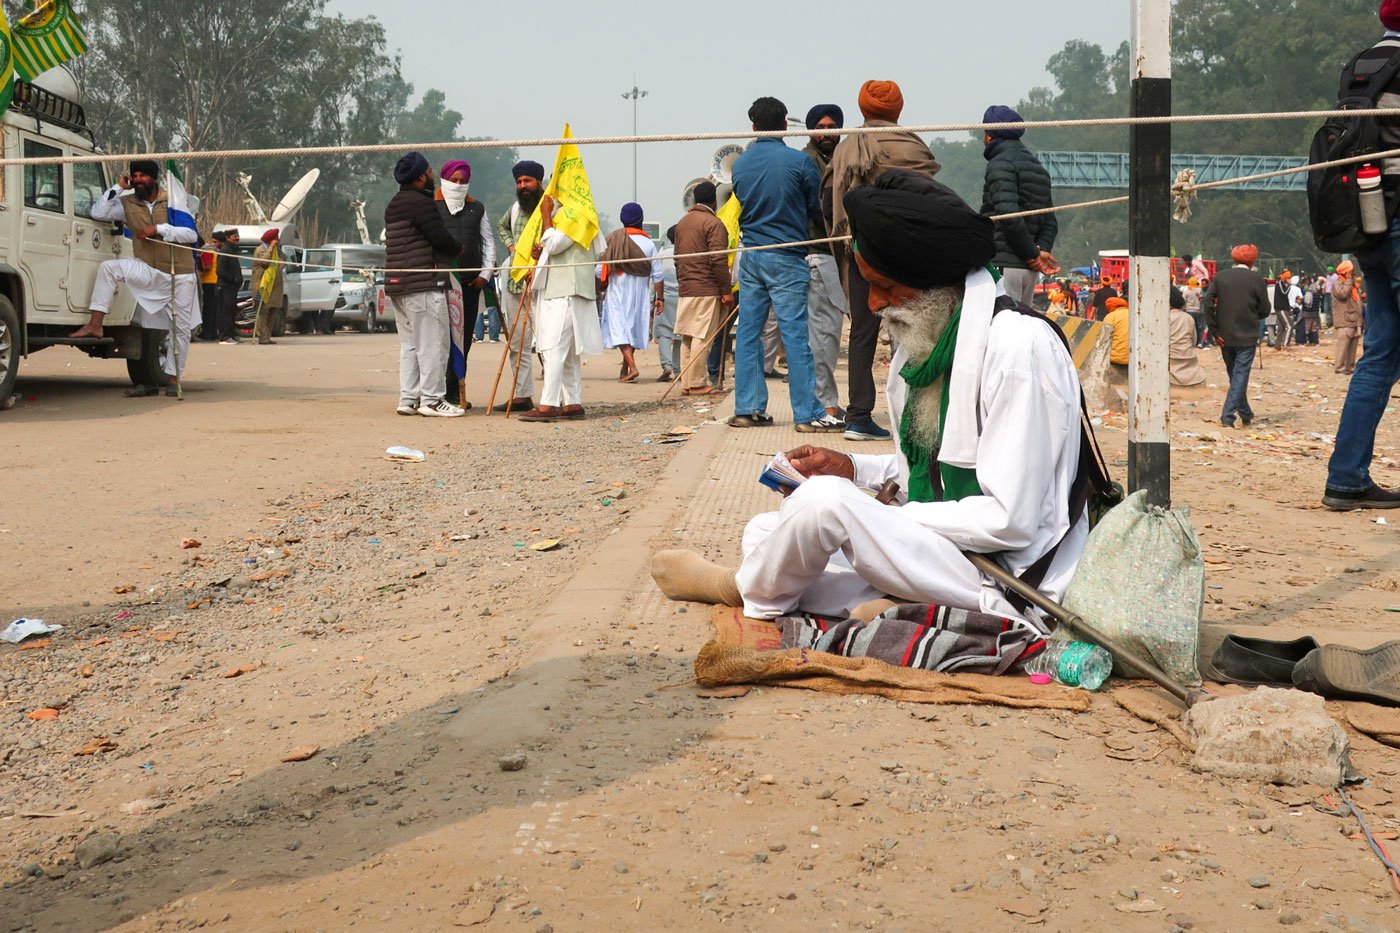 A protesting farmer reciting Gurbani (Sikh hymns), 100 metres from the barricades